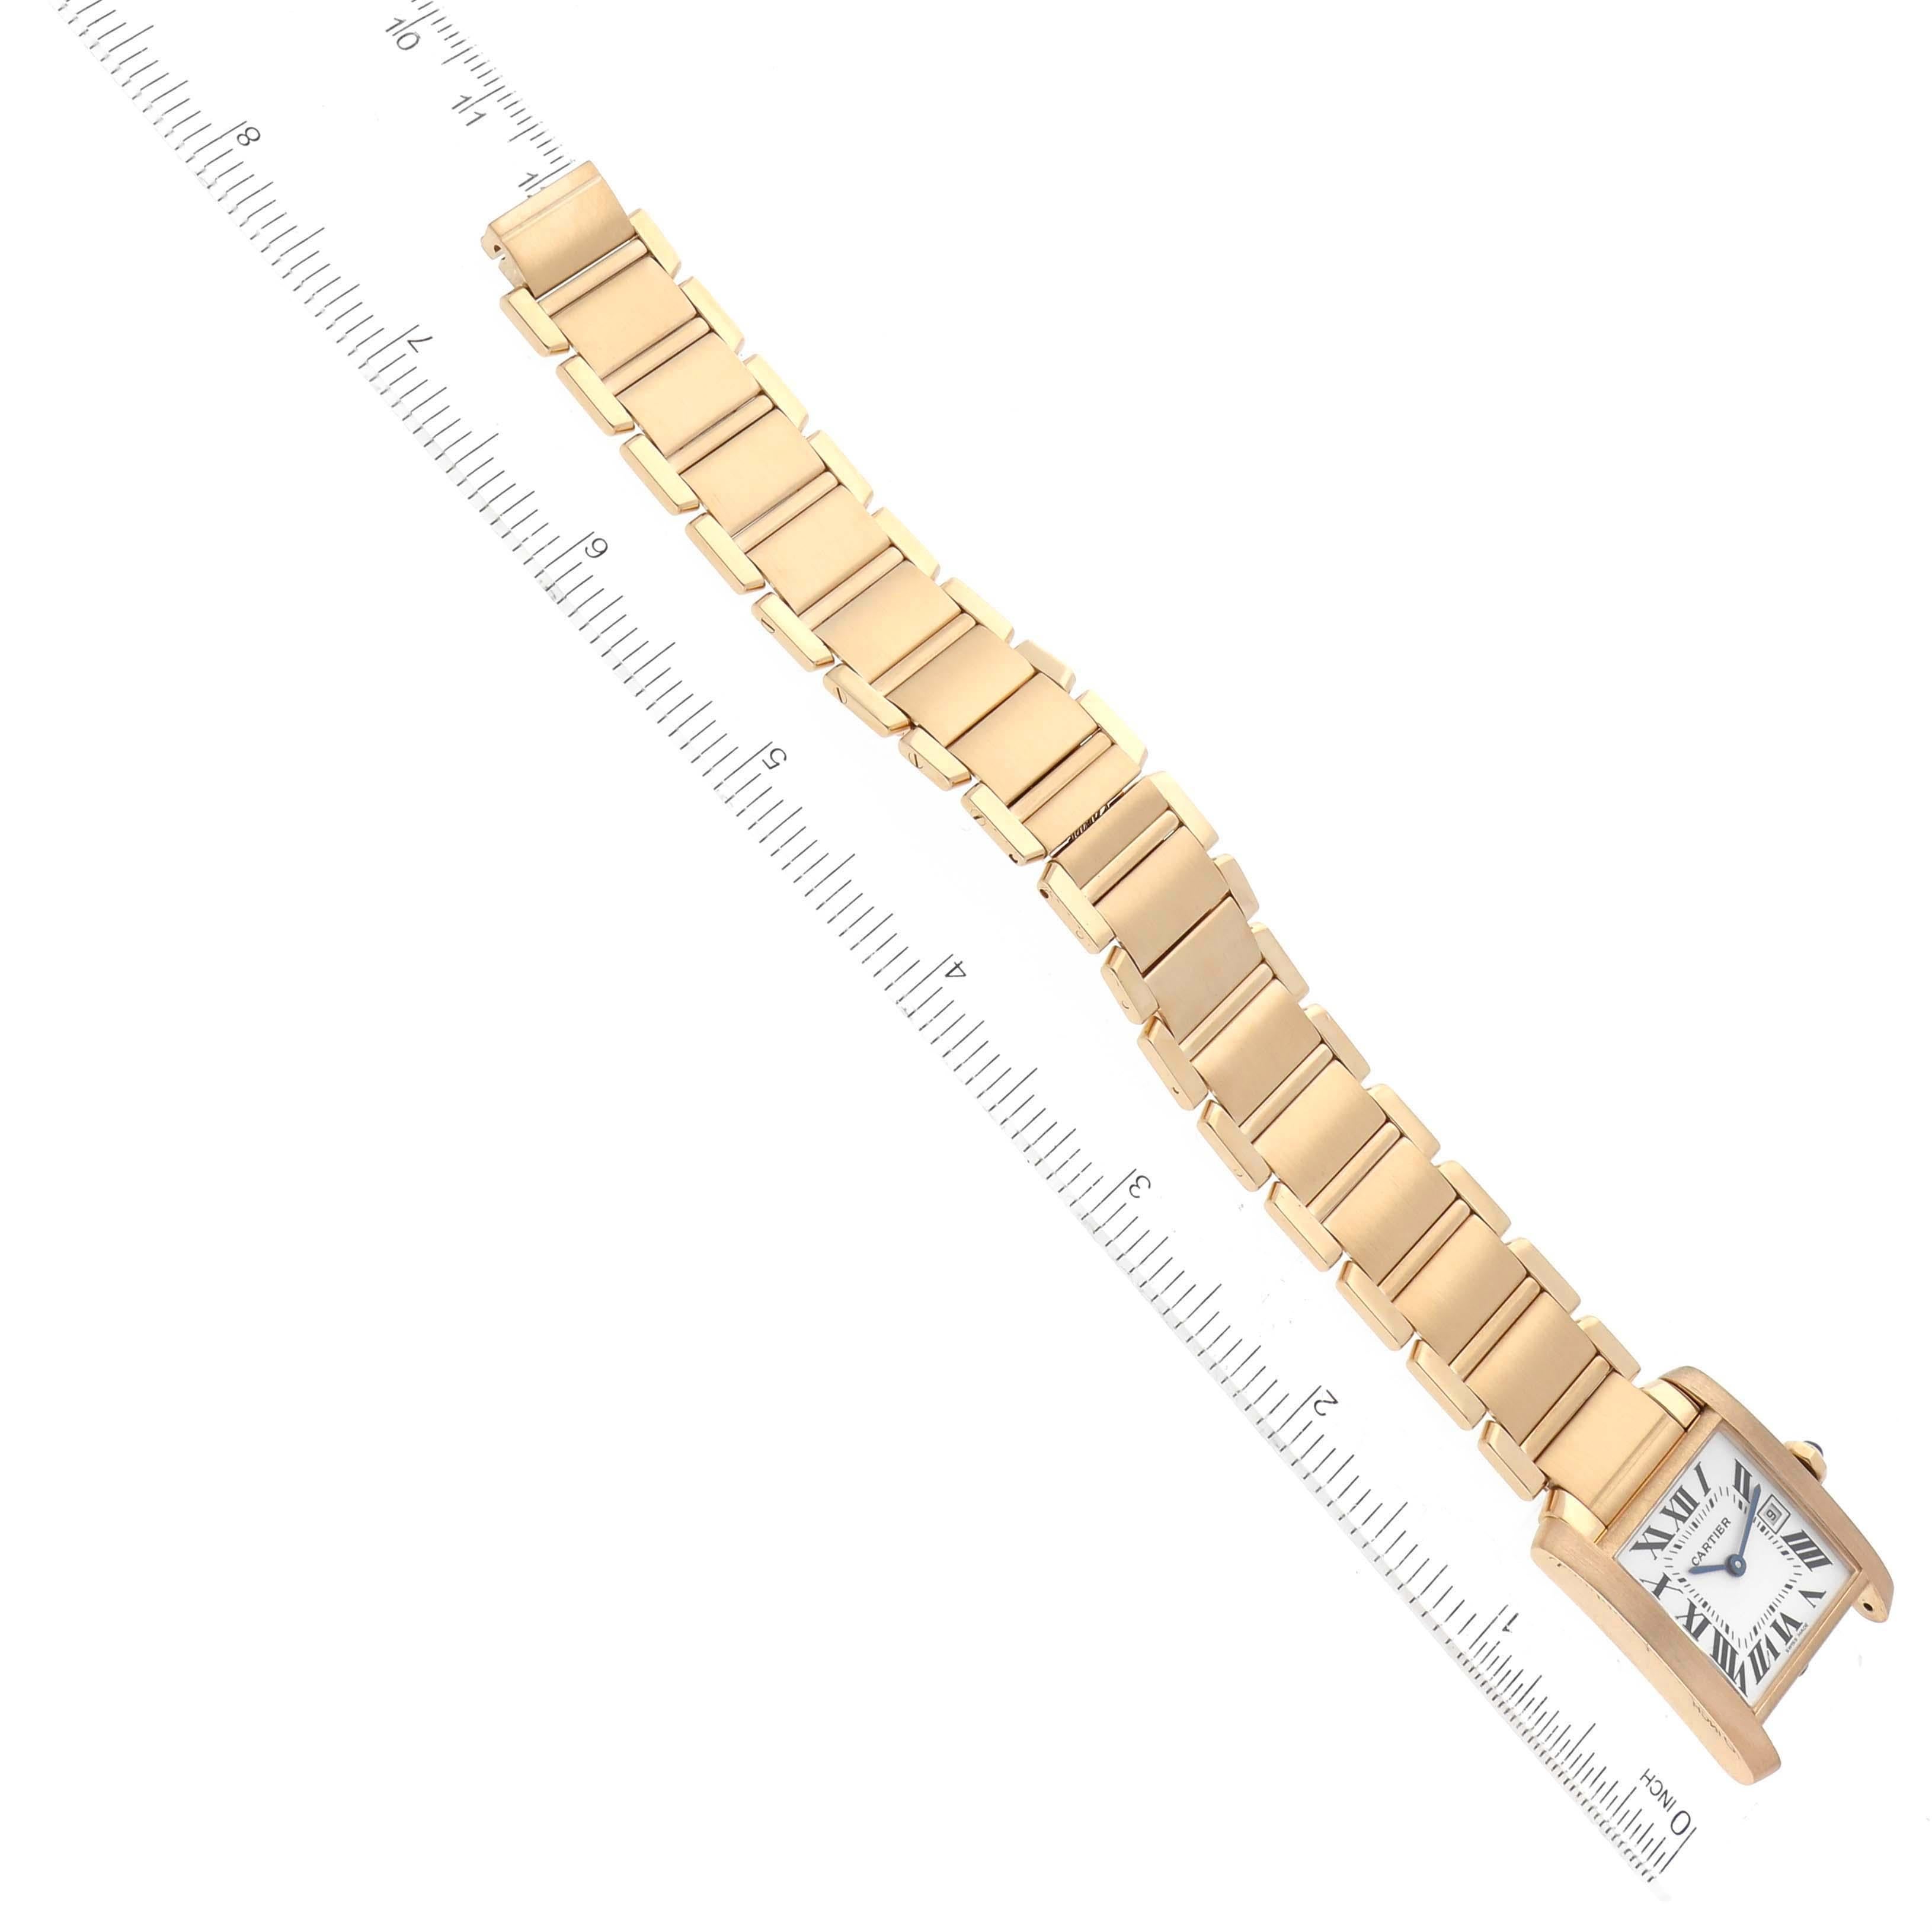 Cartier Tank Francaise Midsize Date Yellow Gold Ladies Watch W50014N2 For Sale 3